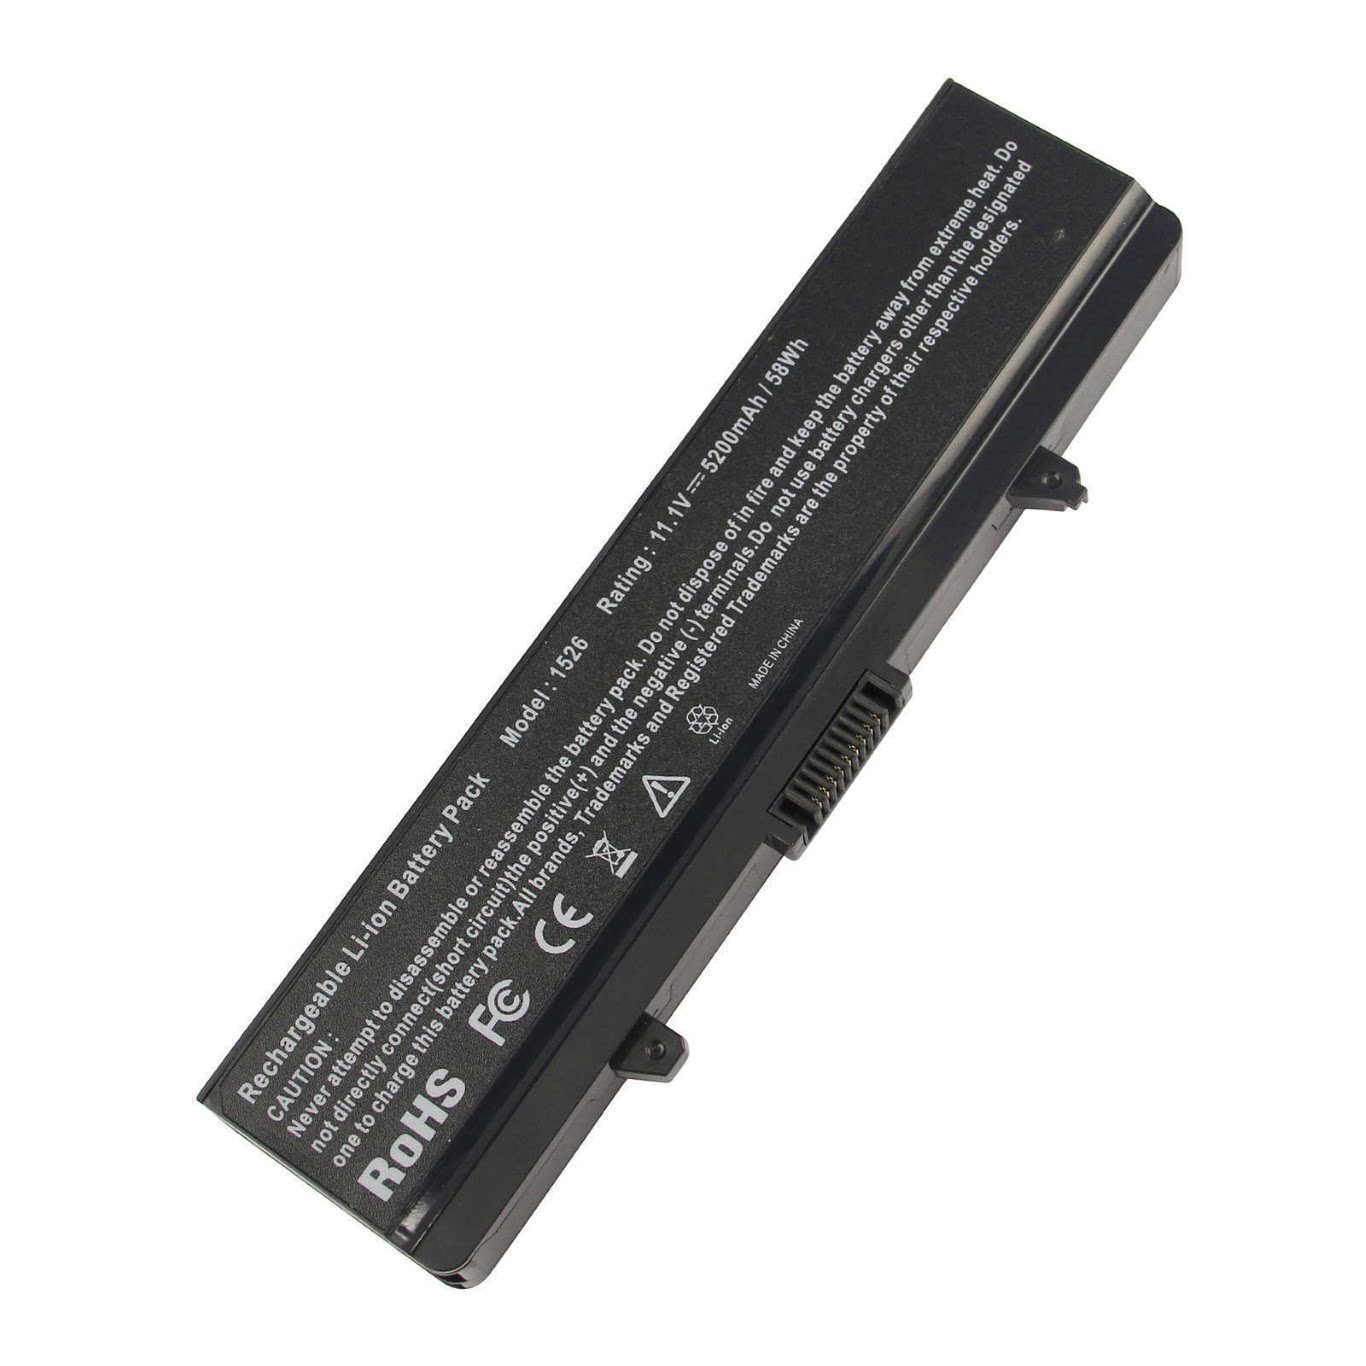 0C601H, 0CR693 replacement Laptop Battery for Dell Inspiron 14 1440, Inspiron 1525